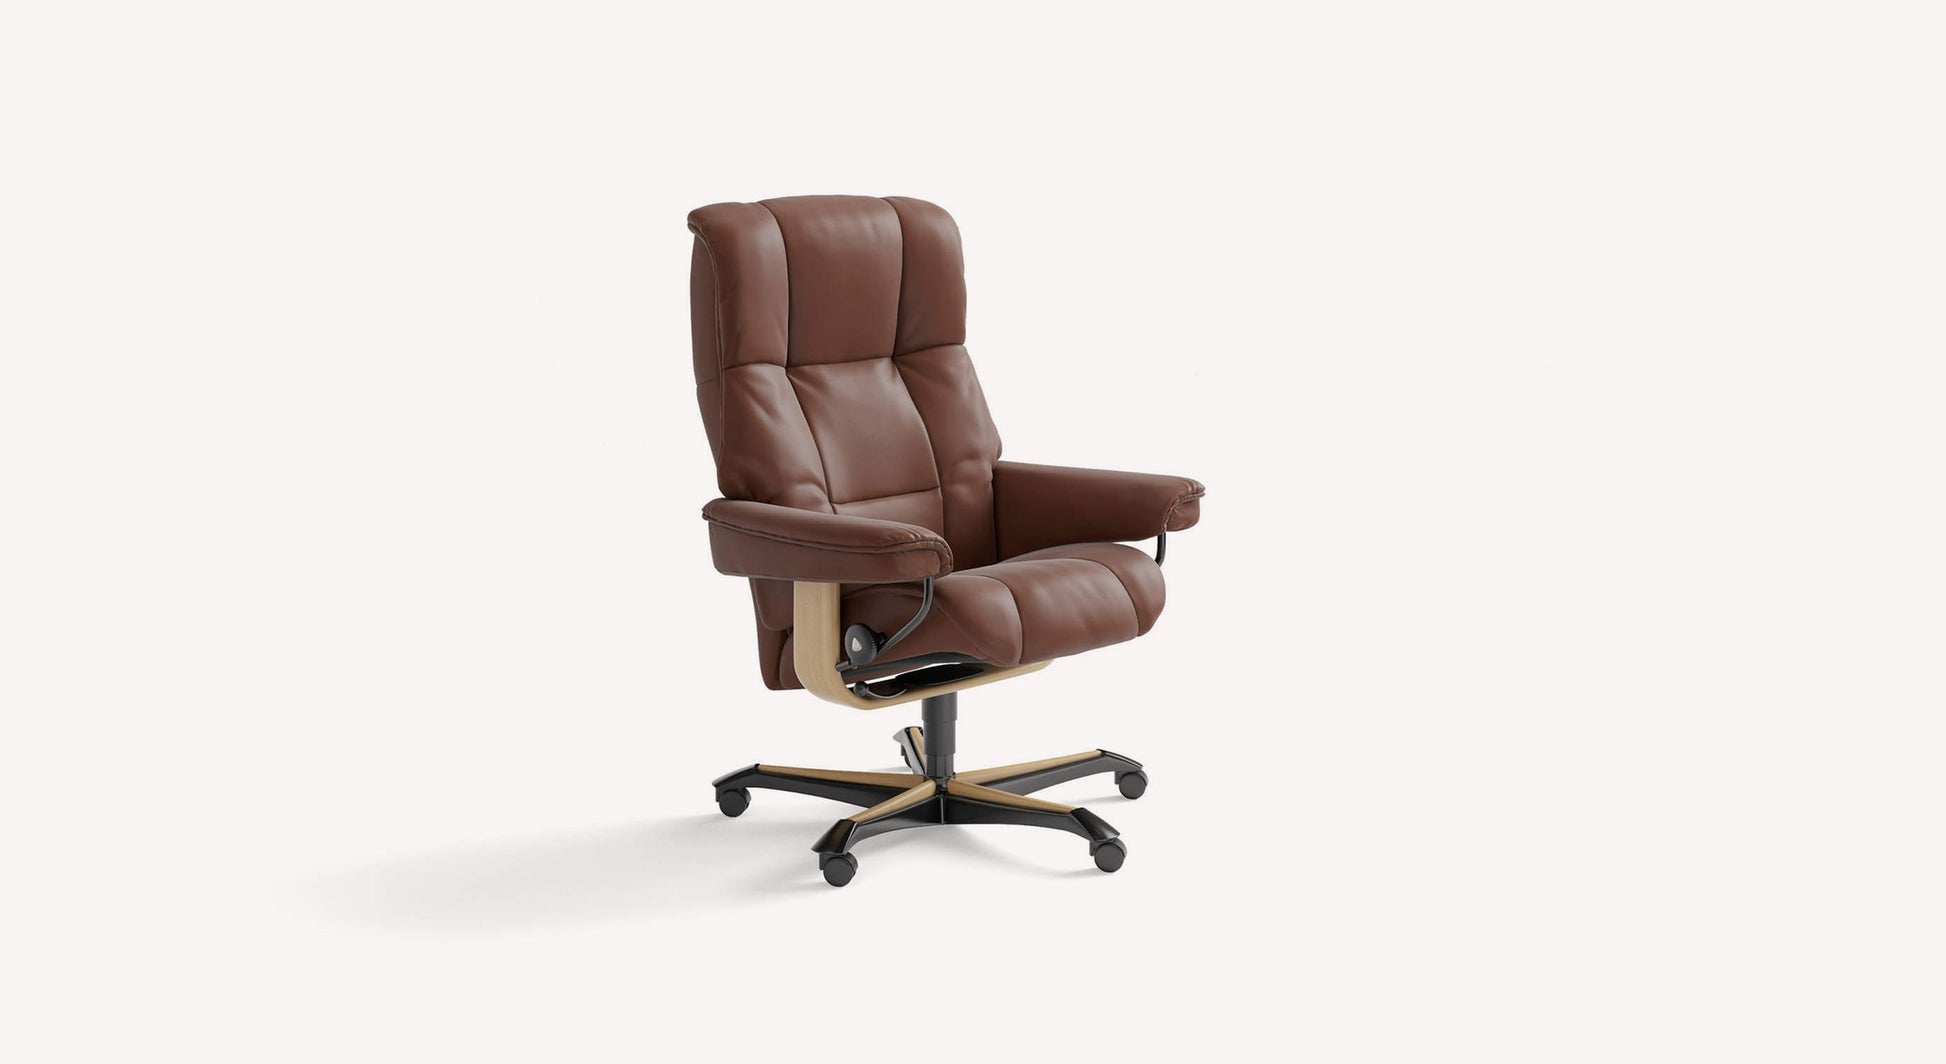 Fauteuil Relax MAYFAIR Office +50 tissus & cuirs au choix